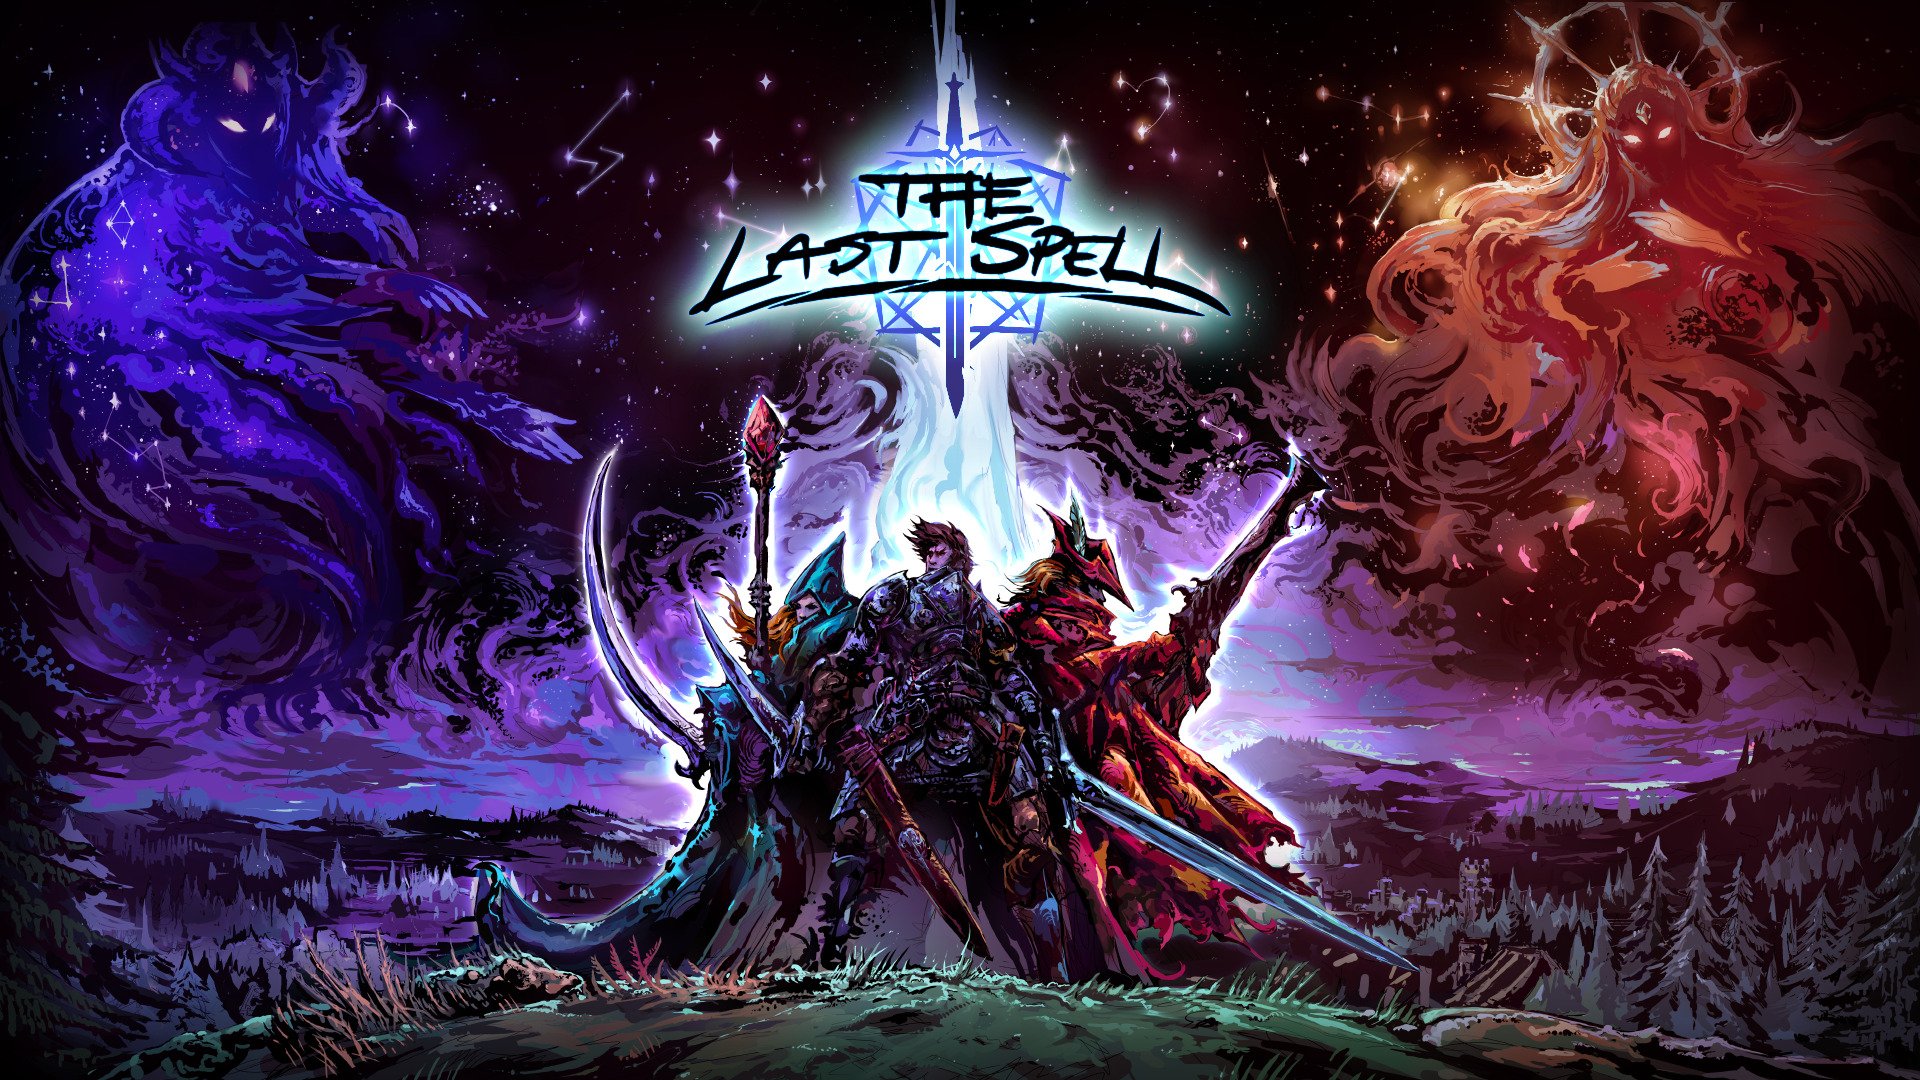 #
      The Last Spell launches in Q1 2023 for PS5, PS4, Switch, and PC